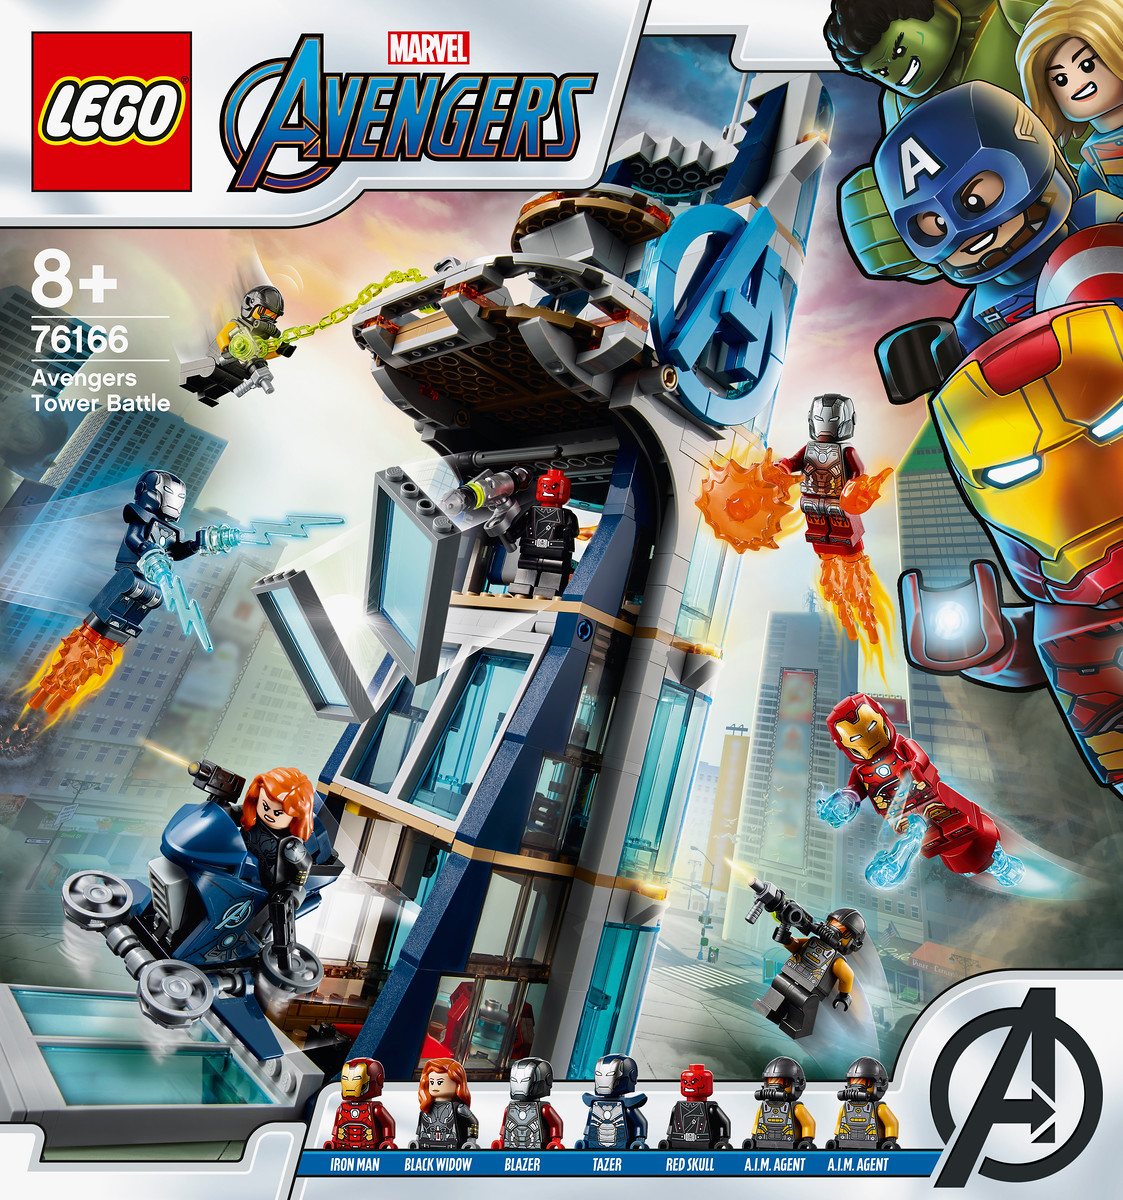 New LEGO Marvel Avengers Sets Coming to Target In June - LaughingPlace.com